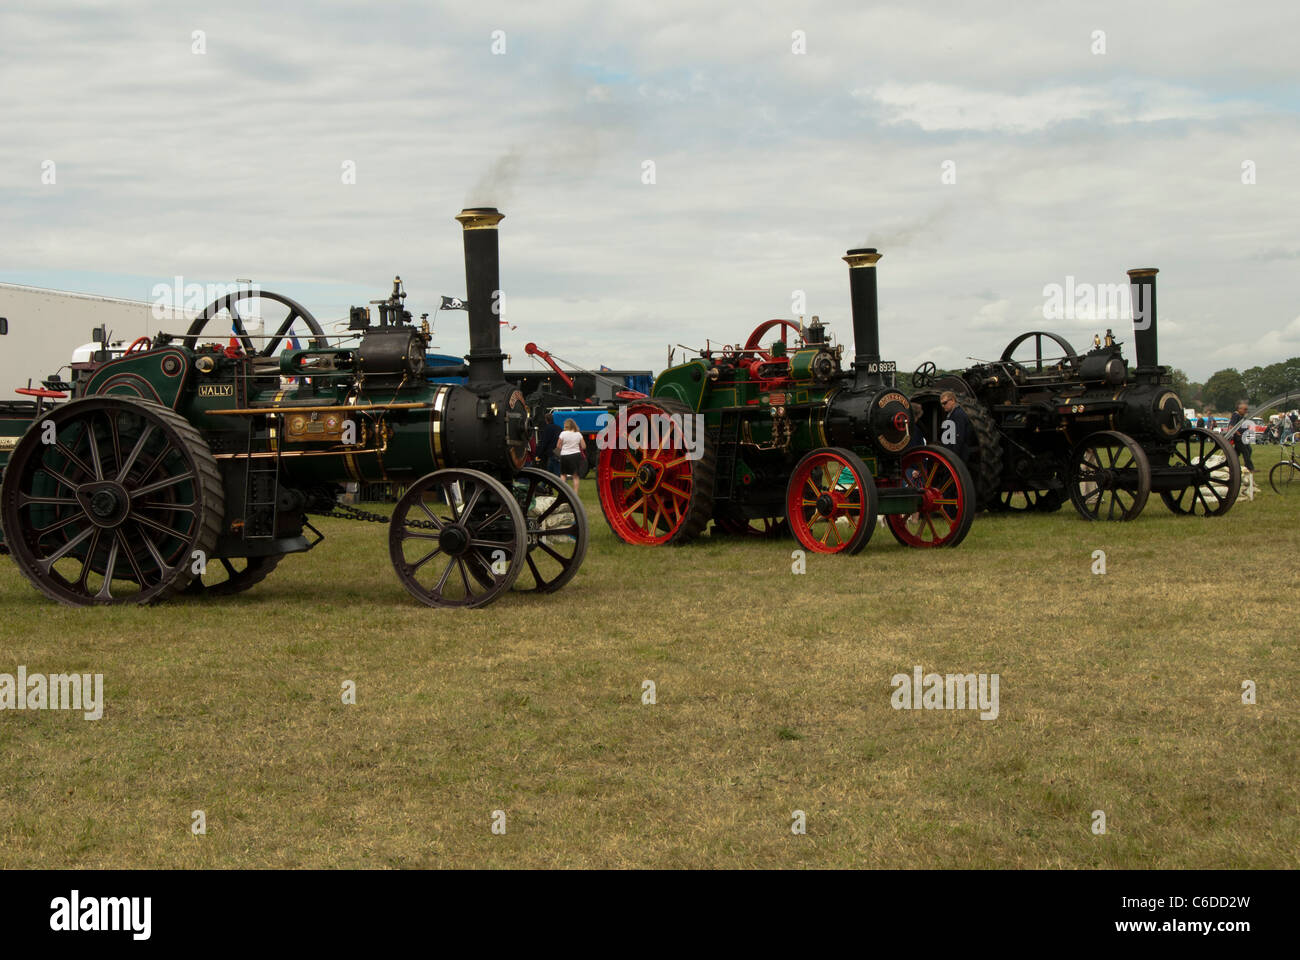 Three steam traction engines lined up in a field, shows smoke coming from the funnels of the engines, with detail in the sky Stock Photo